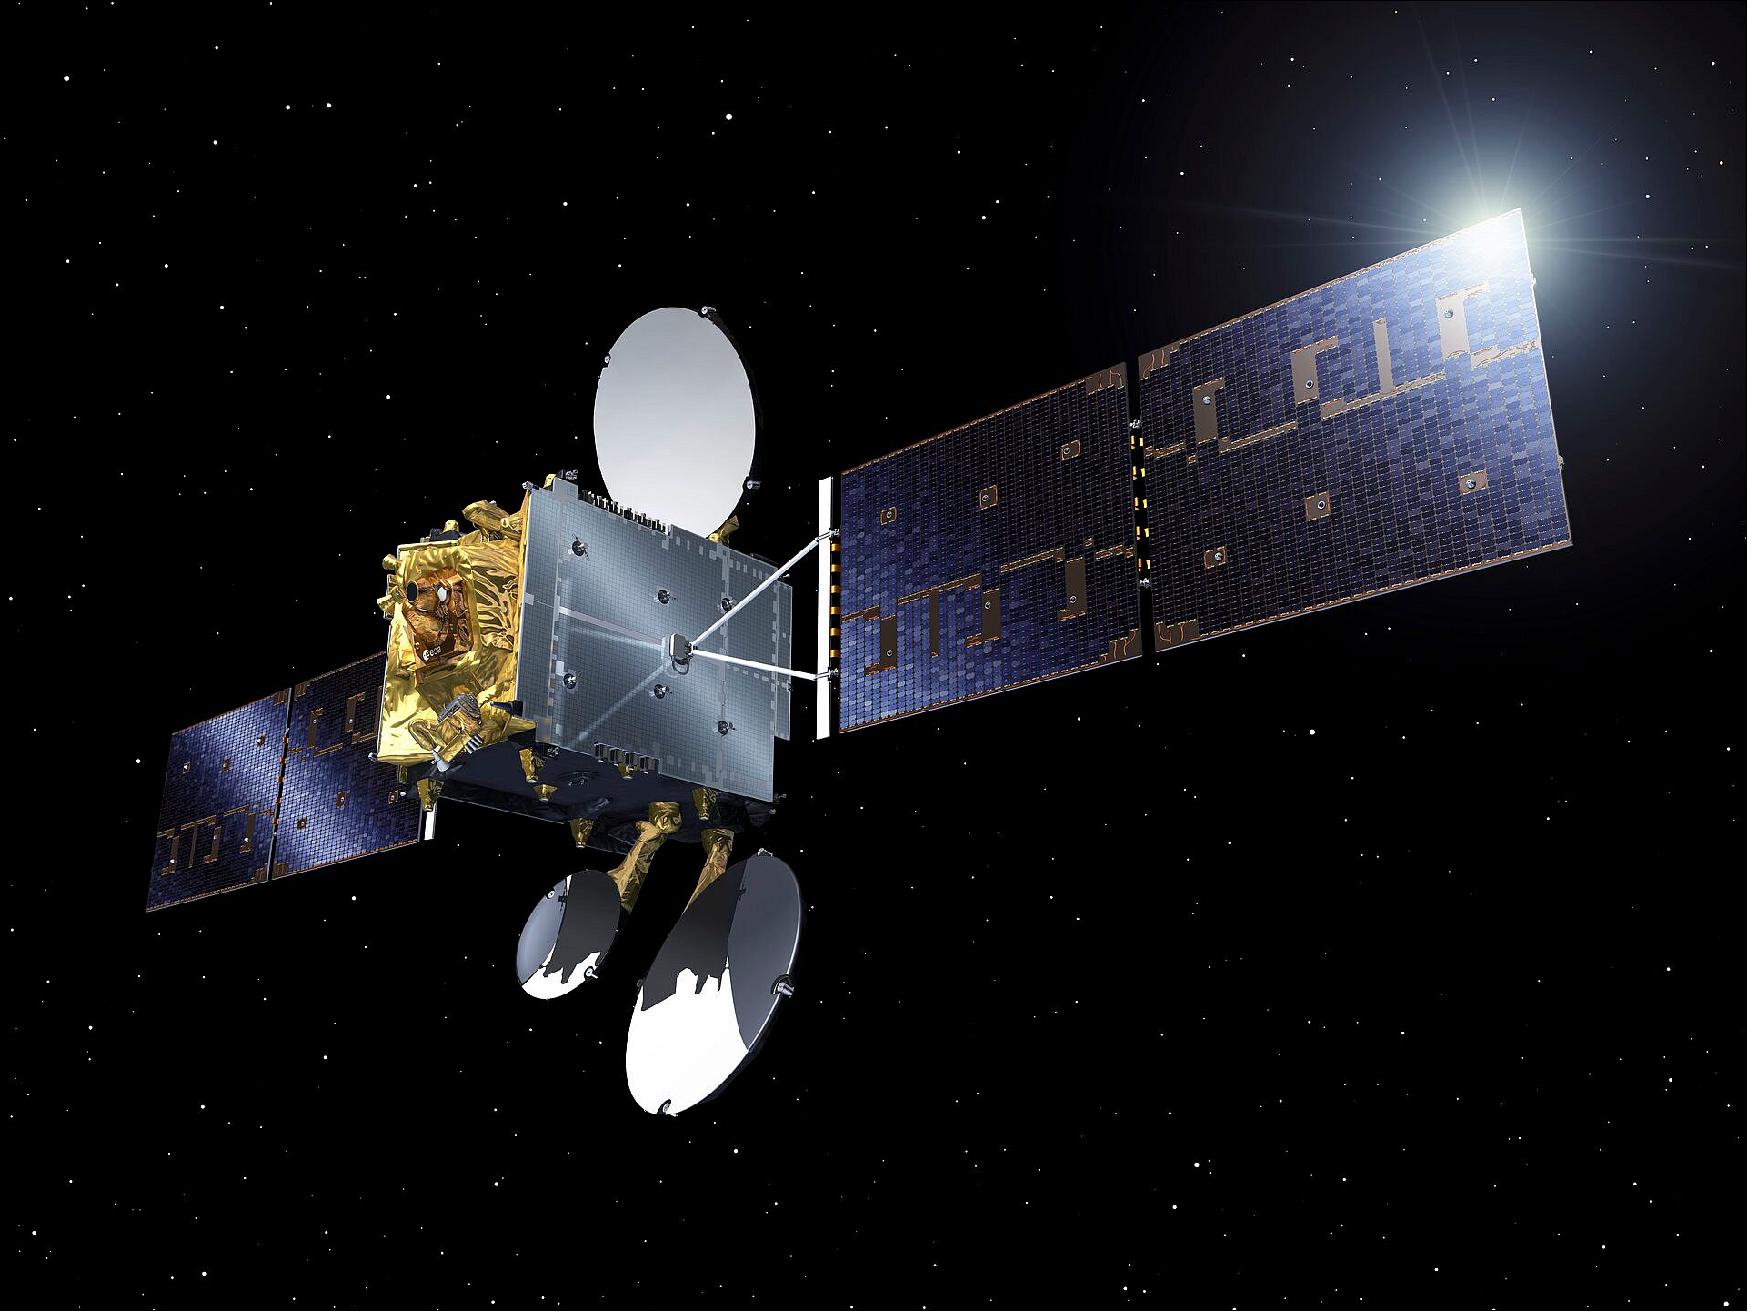 Figure 13: EDRS-C is the second node of the European Data Relay System (EDRS). It is the first dedicated EDRS satellite as well as the first flight for ESA’s SmallGEO platform (image credit: ESA)